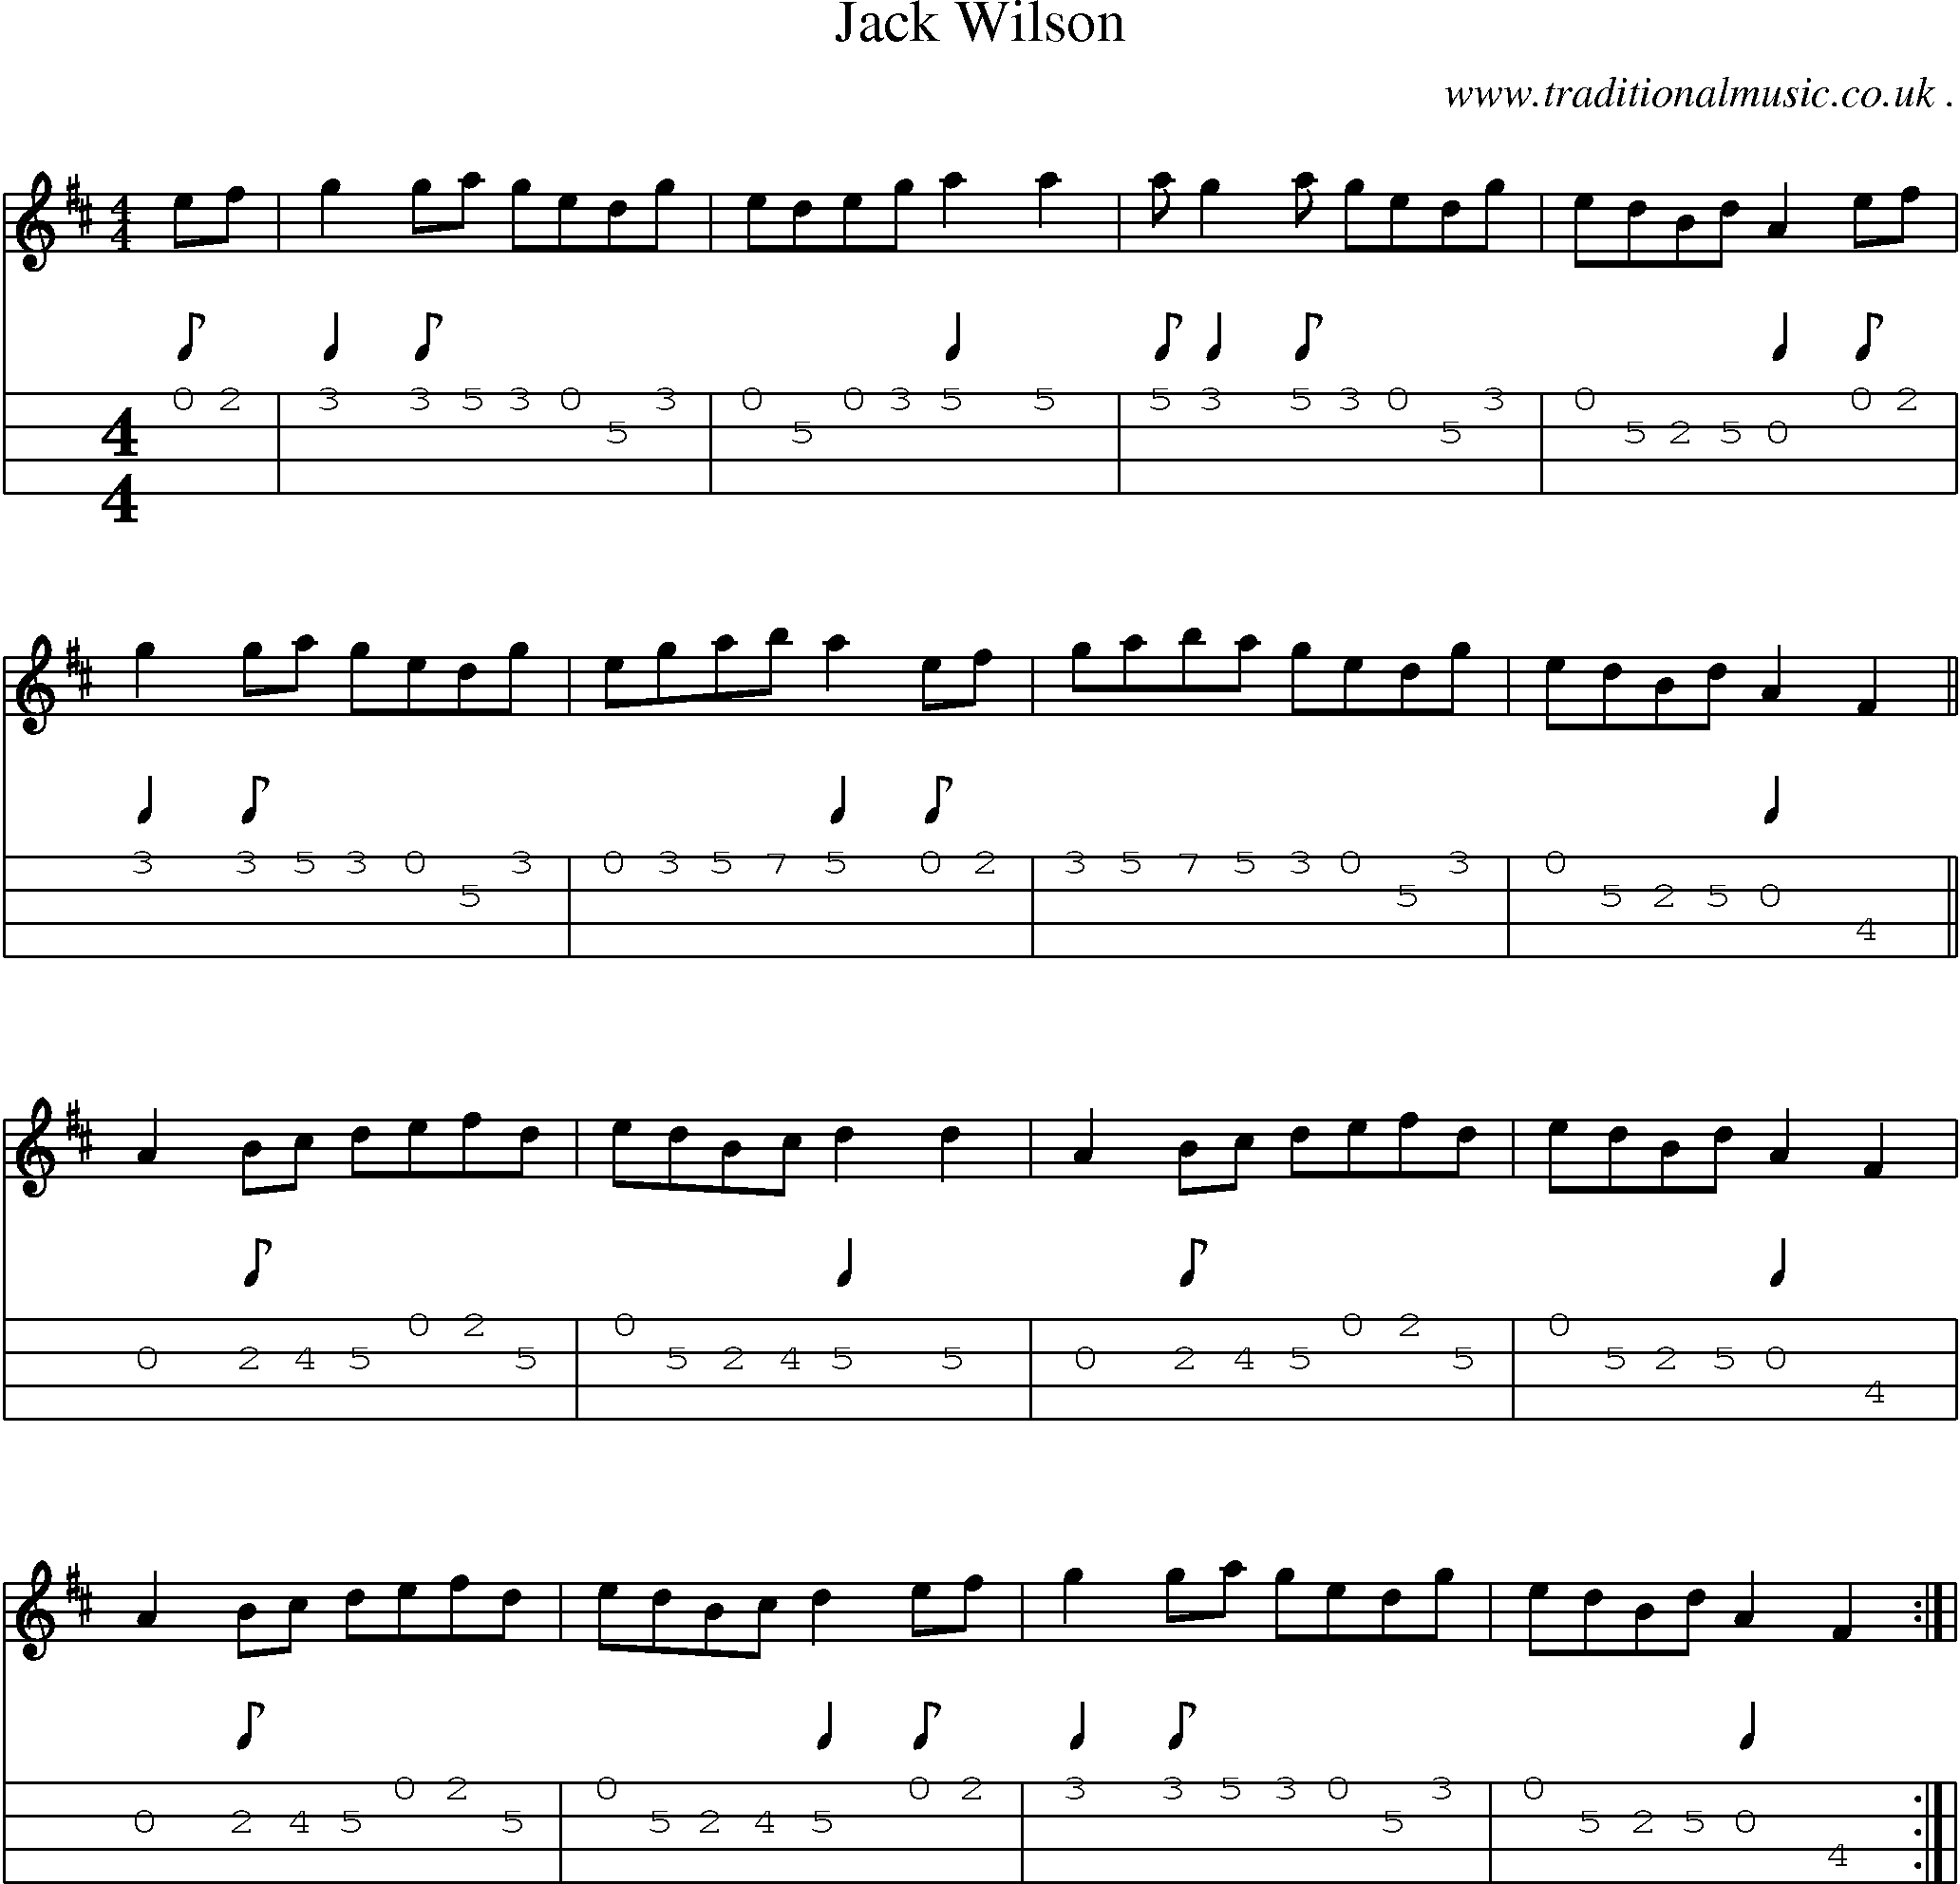 Music Score and Guitar Tabs for Jack Wilson